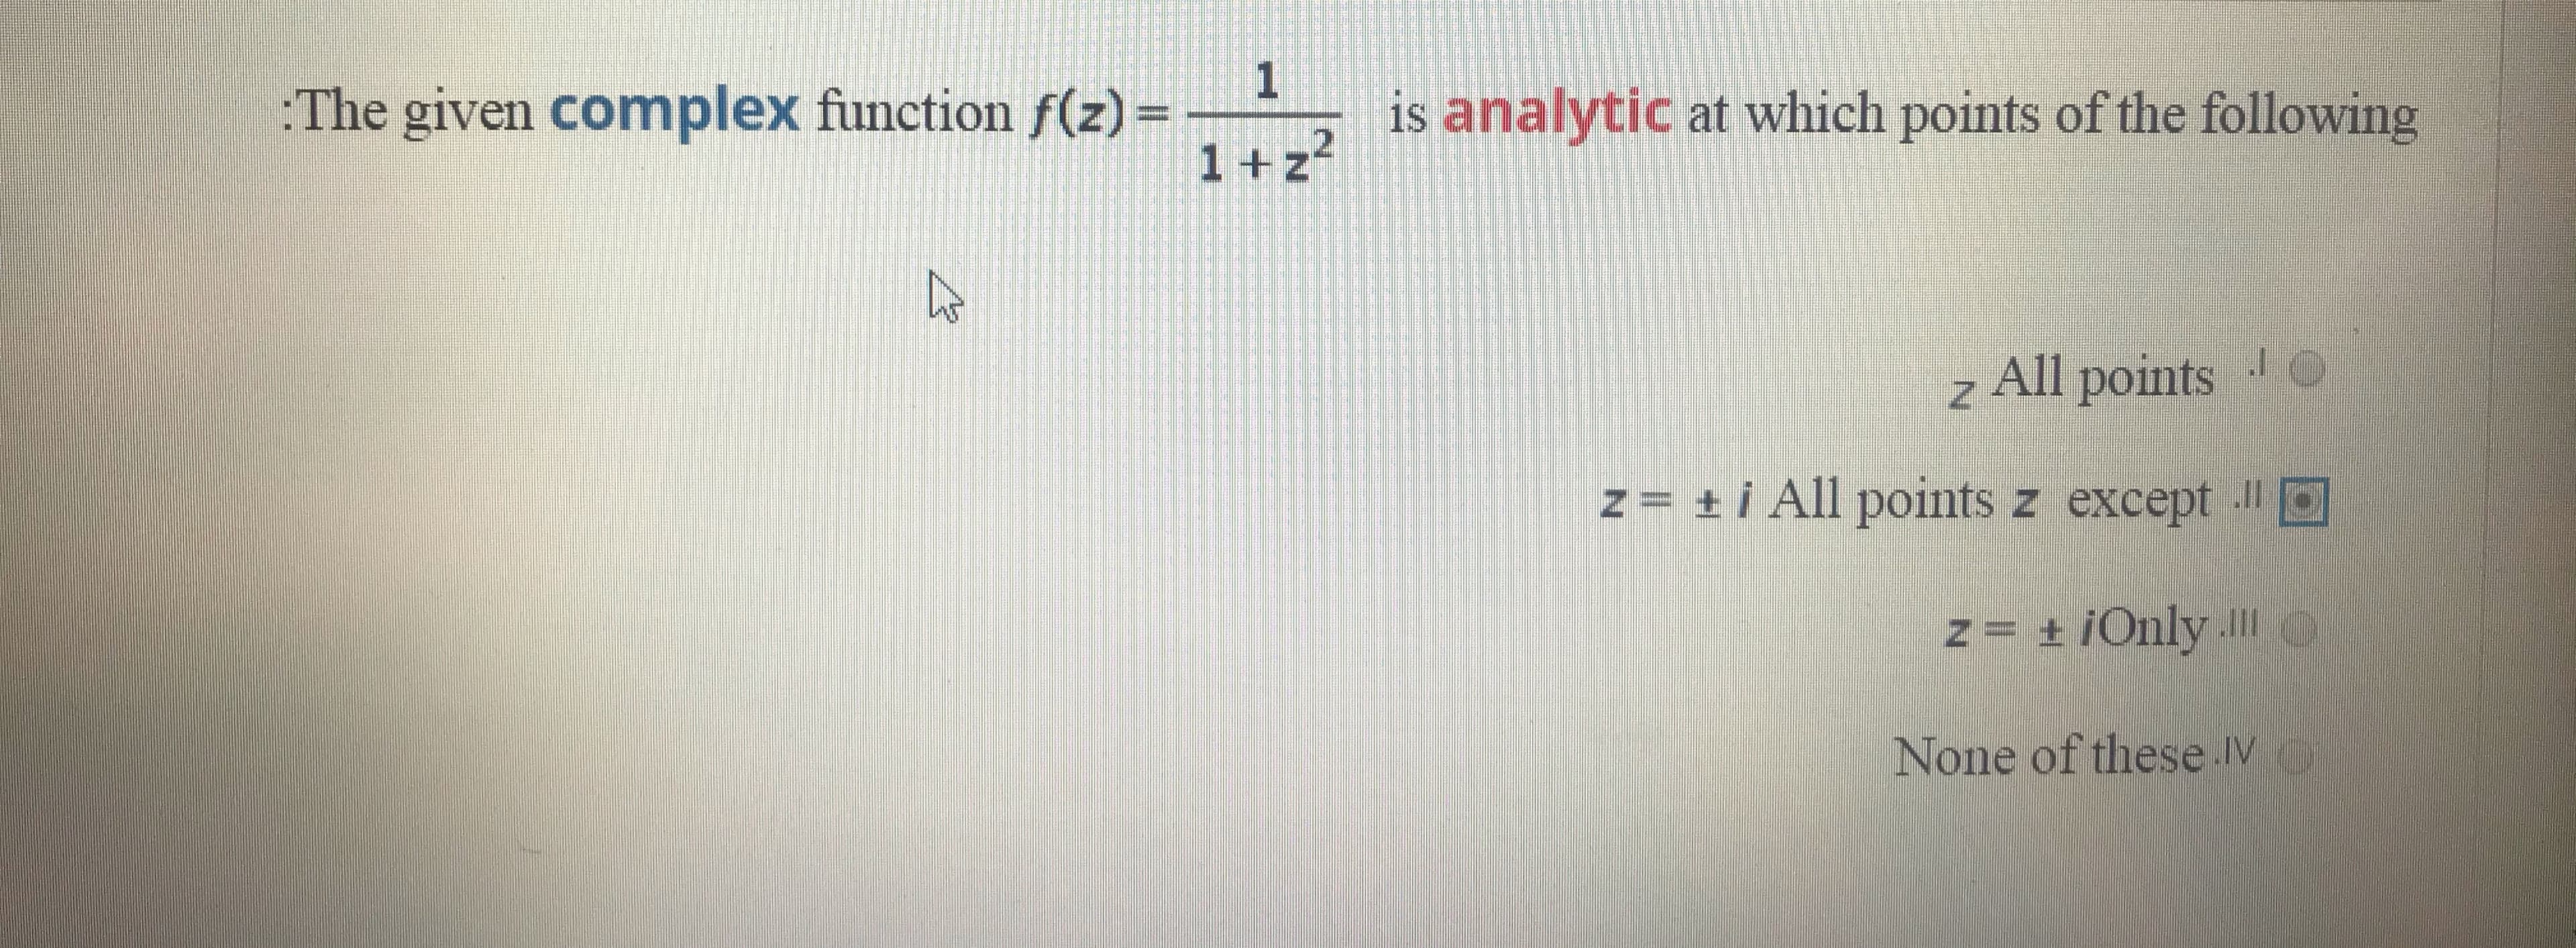 The given complex function f(z) =
halytic at which points of the followng
1+z
All points
z= +i All points z except
ZEOnly
None of these
